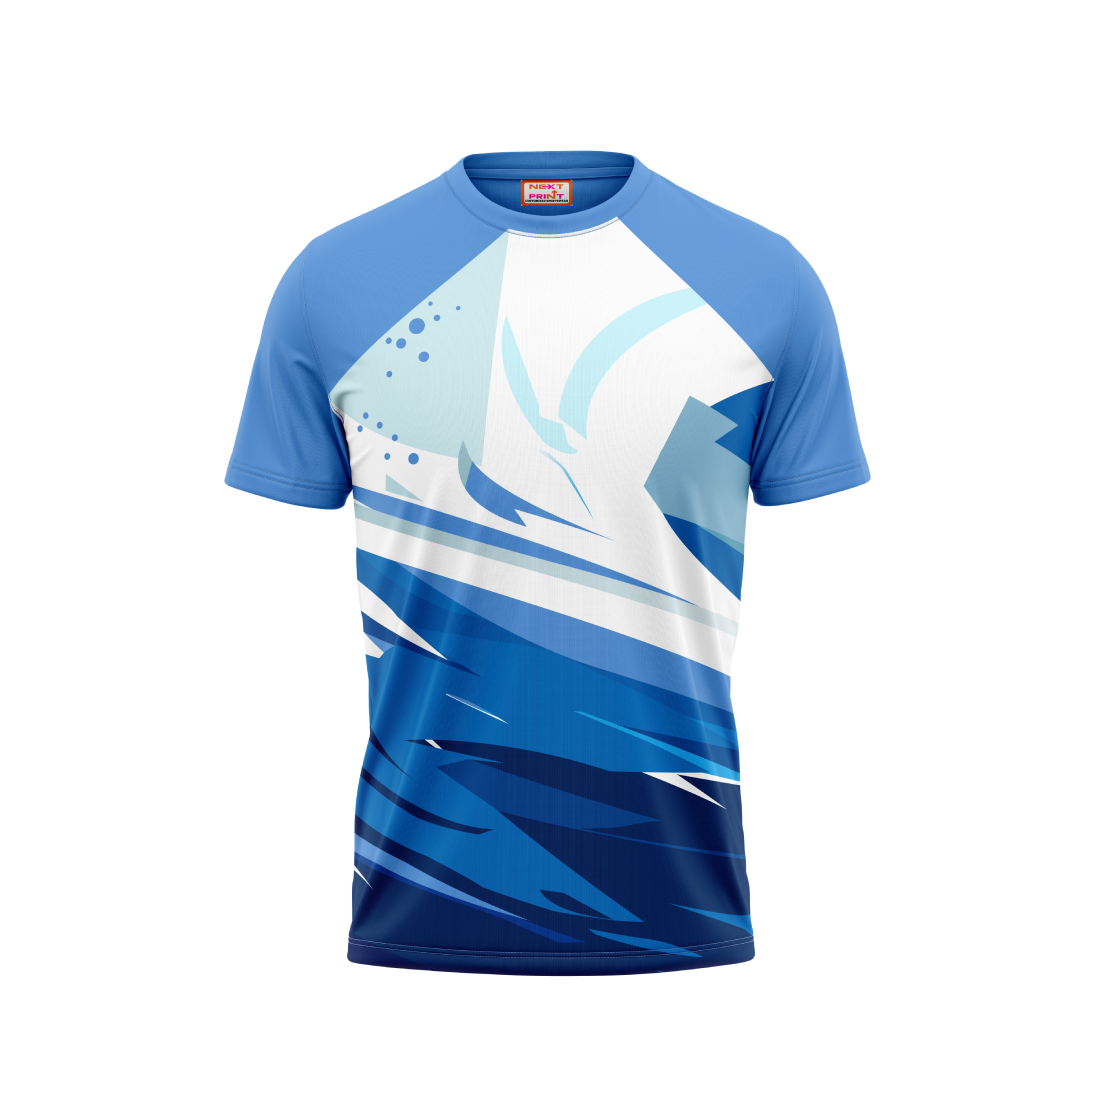 Round Neck Printed Jersey Skyblue NP5000072